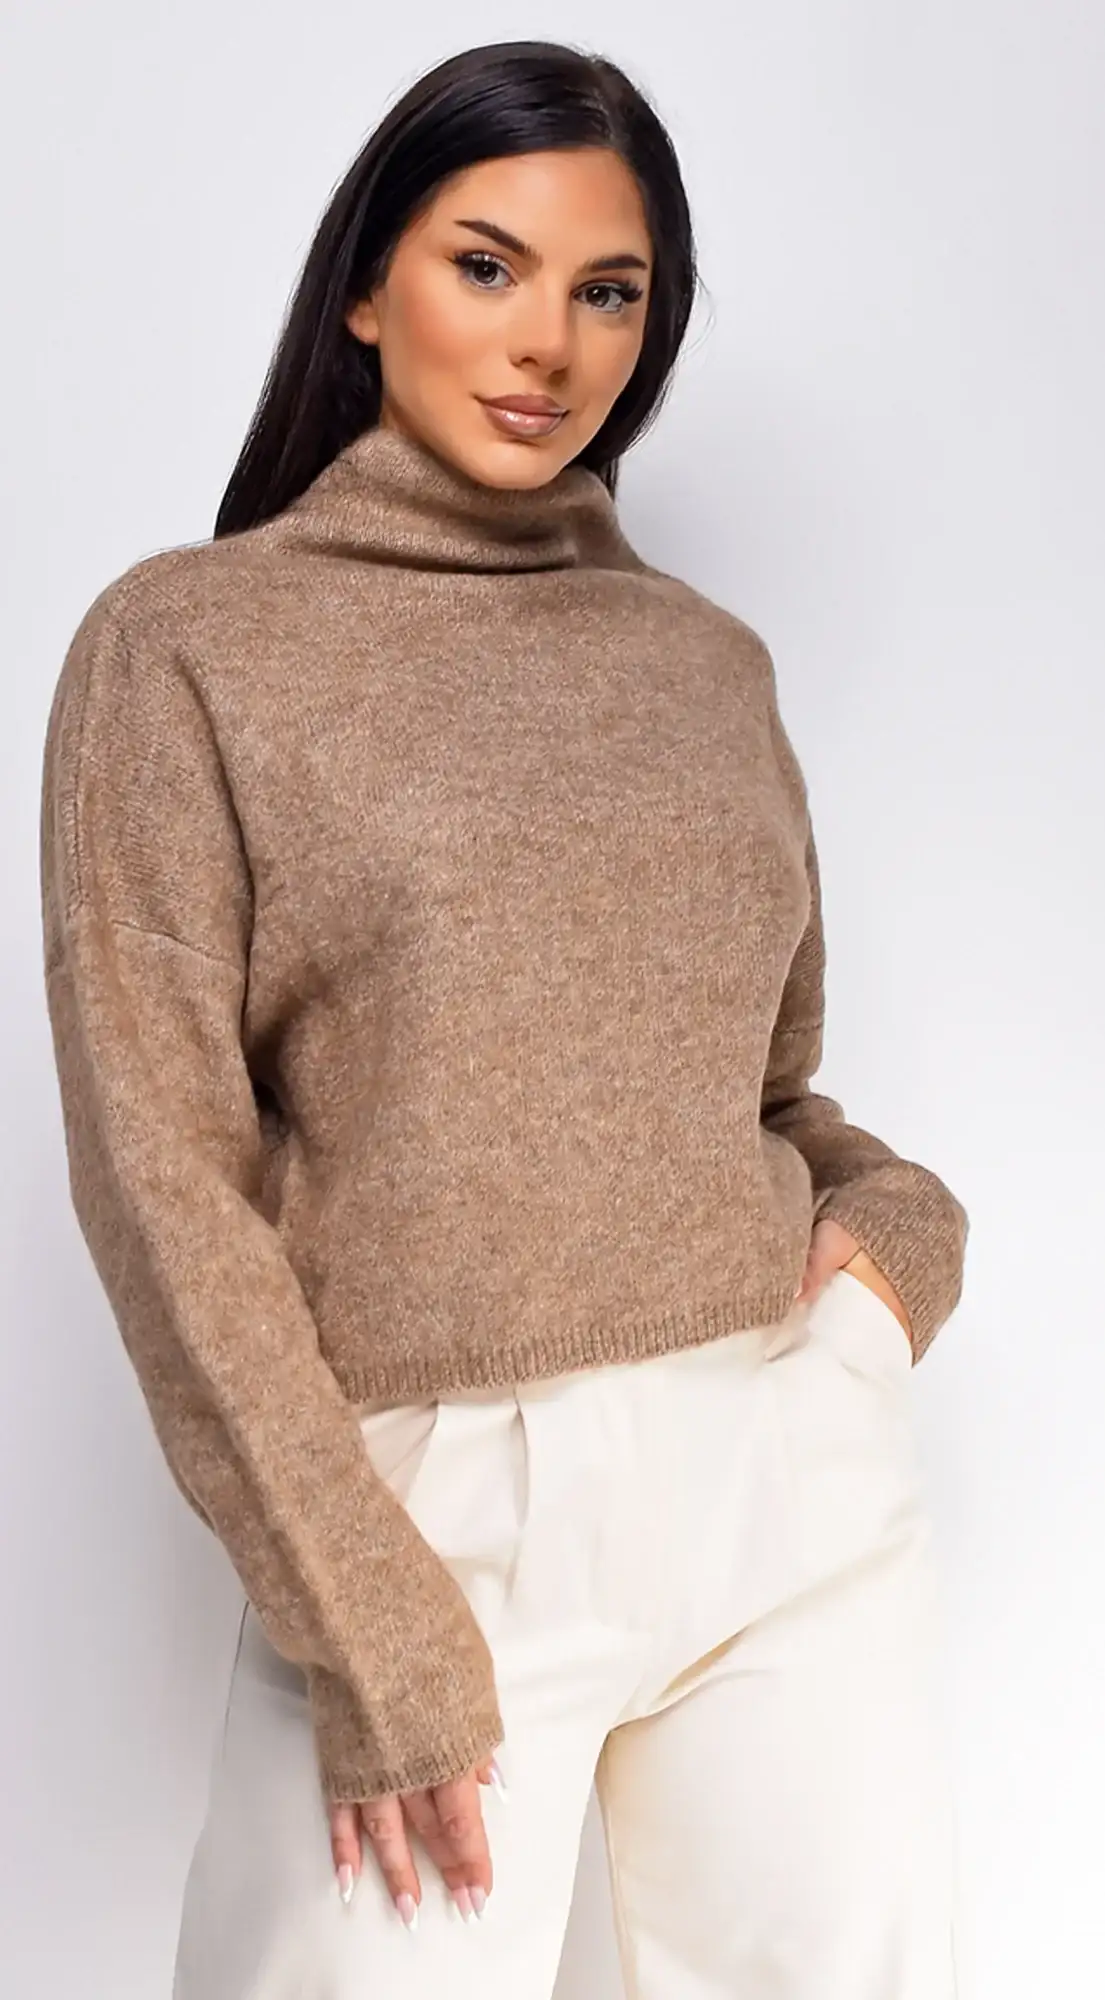 Image of Surya Brown Marl Knit Mock Neck Sweater Top